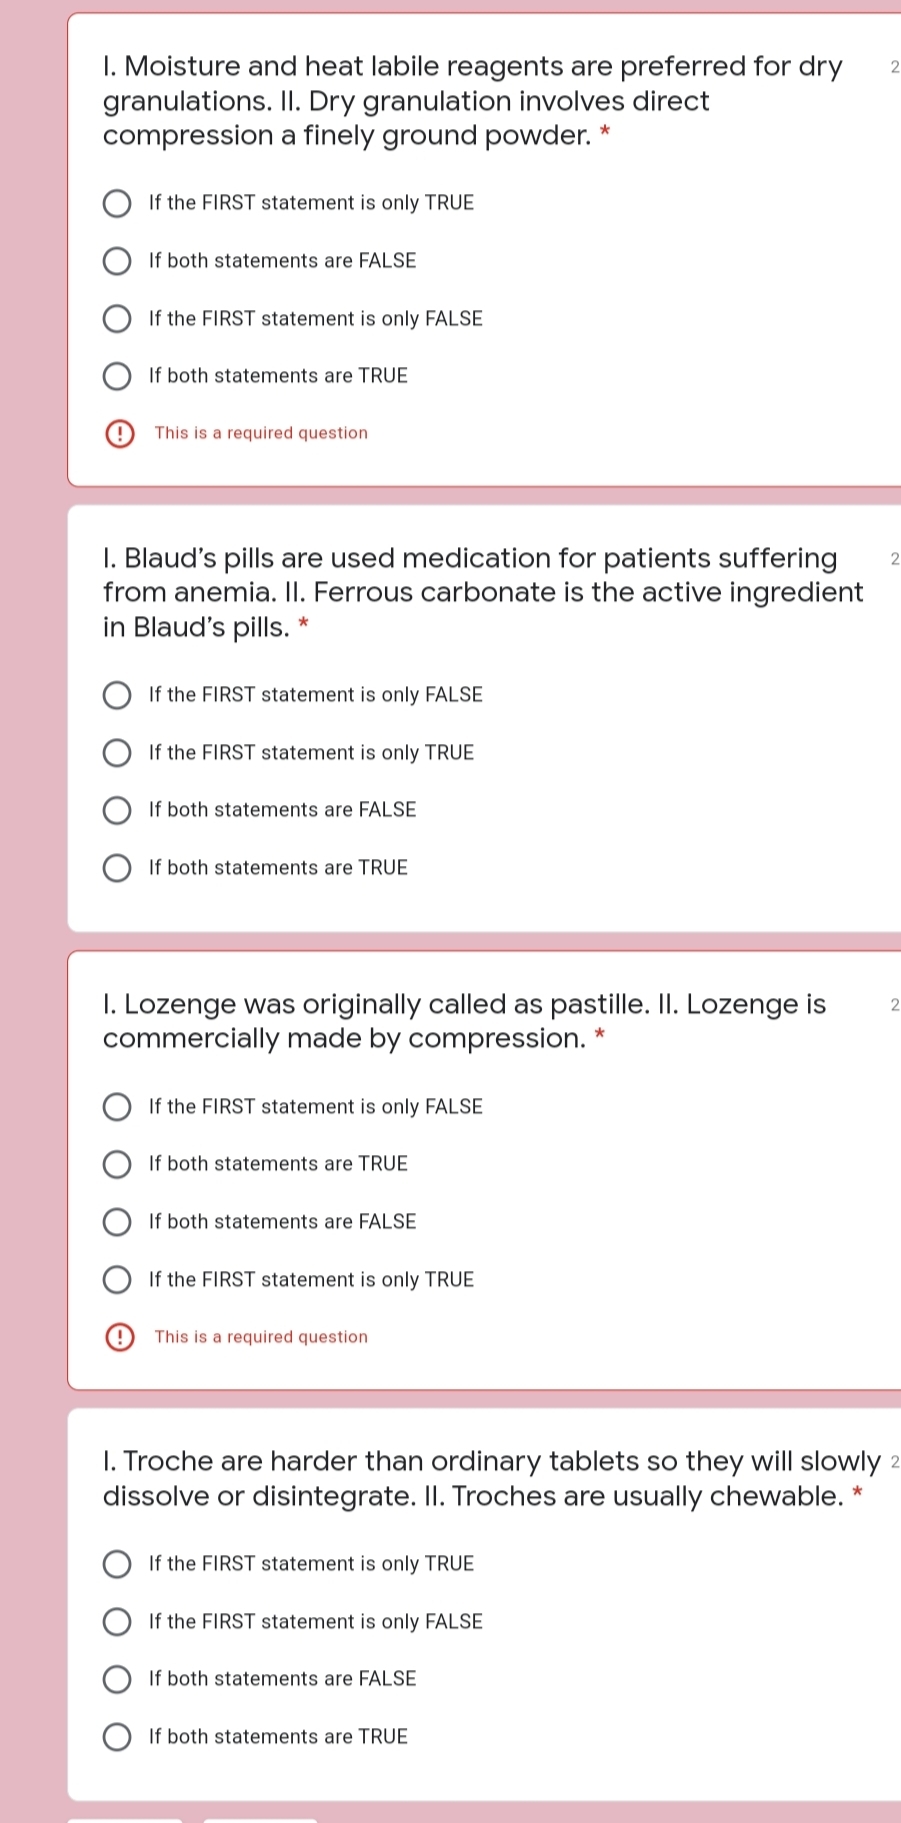 I. Moisture and heat labile reagents are preferred for dry
granulations. II. Dry granulation involves direct
compression a finely ground powder.
If the FIRST statement is only TRUE
If both statements are FALSE
If the FIRST statement is only FALSE
If both statements are TRUE
This is a required question
I. Blaud's pills are used medication for patients suffering
from anemia. II. Ferrous carbonate is the active ingredient
in Blaud's pills. *
2
If the FIRST statement is only FALSE
If the FIRST statement is only TRUE
If both statements are FALSE
If both statements are TRUE
I. Lozenge was originally called as pastille. II. Lozenge is
commercially made by compression.
If the FIRST statement is only FALSE
If both statements are TRUE
If both statements are FALSE
If the FIRST statement is only TRUE
This is a required question
I. Troche are harder than ordinary tablets so they will slowly 2
dissolve or disintegrate. II. Troches are usually chewable. *
If the FIRST statement is only TRUE
If the FIRST statement is only FALSE
If both statements are FALSE
If both statements are TRUE
